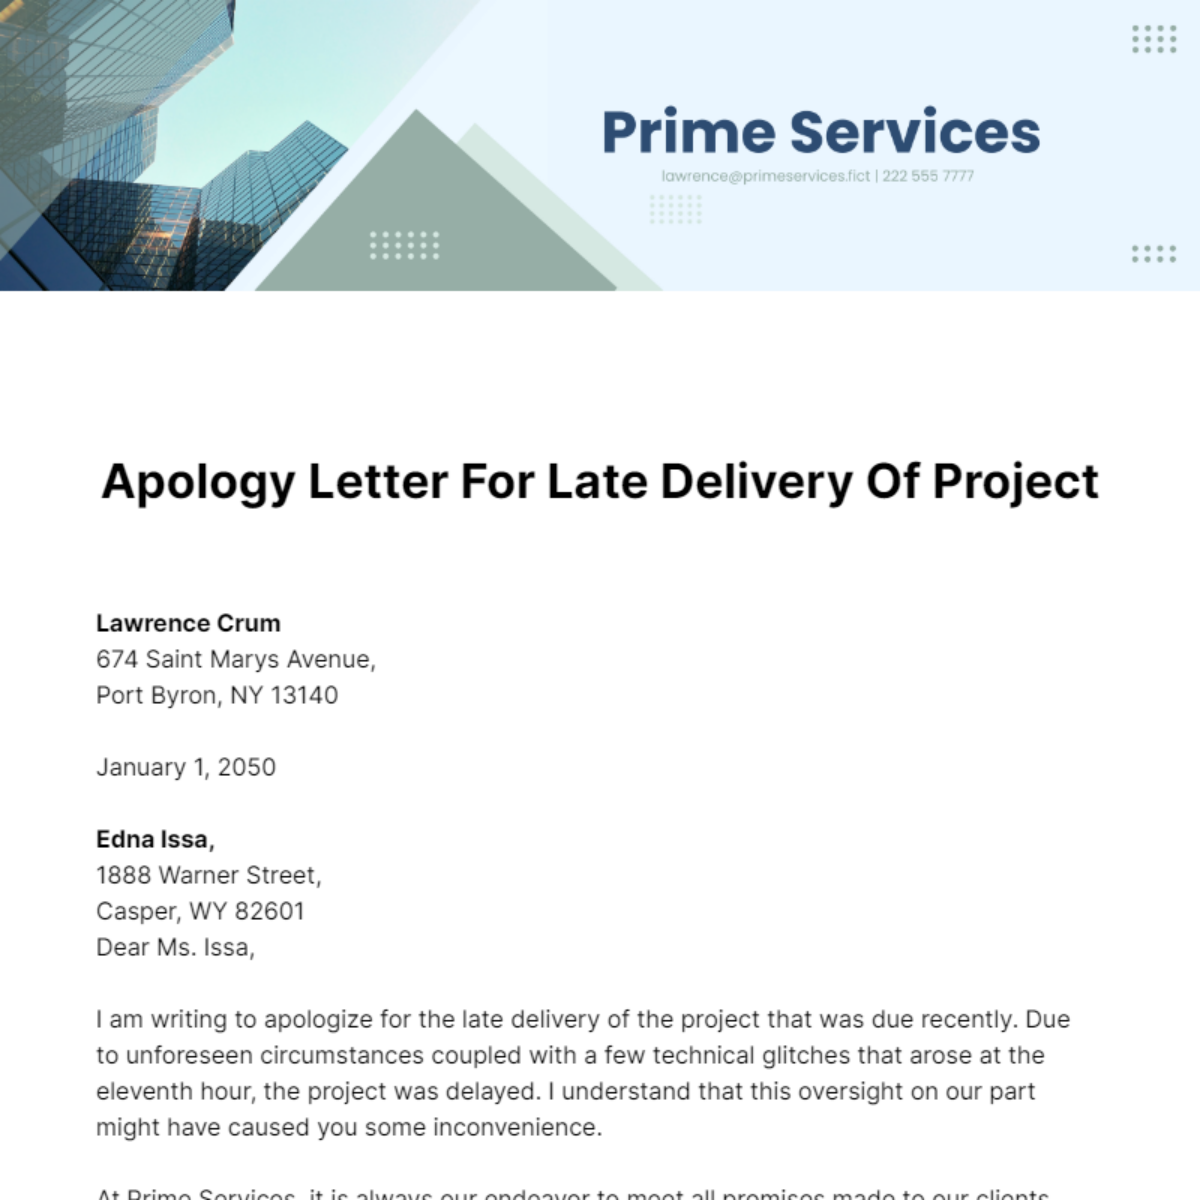 Apology Letter for Late Delivery of Project Template